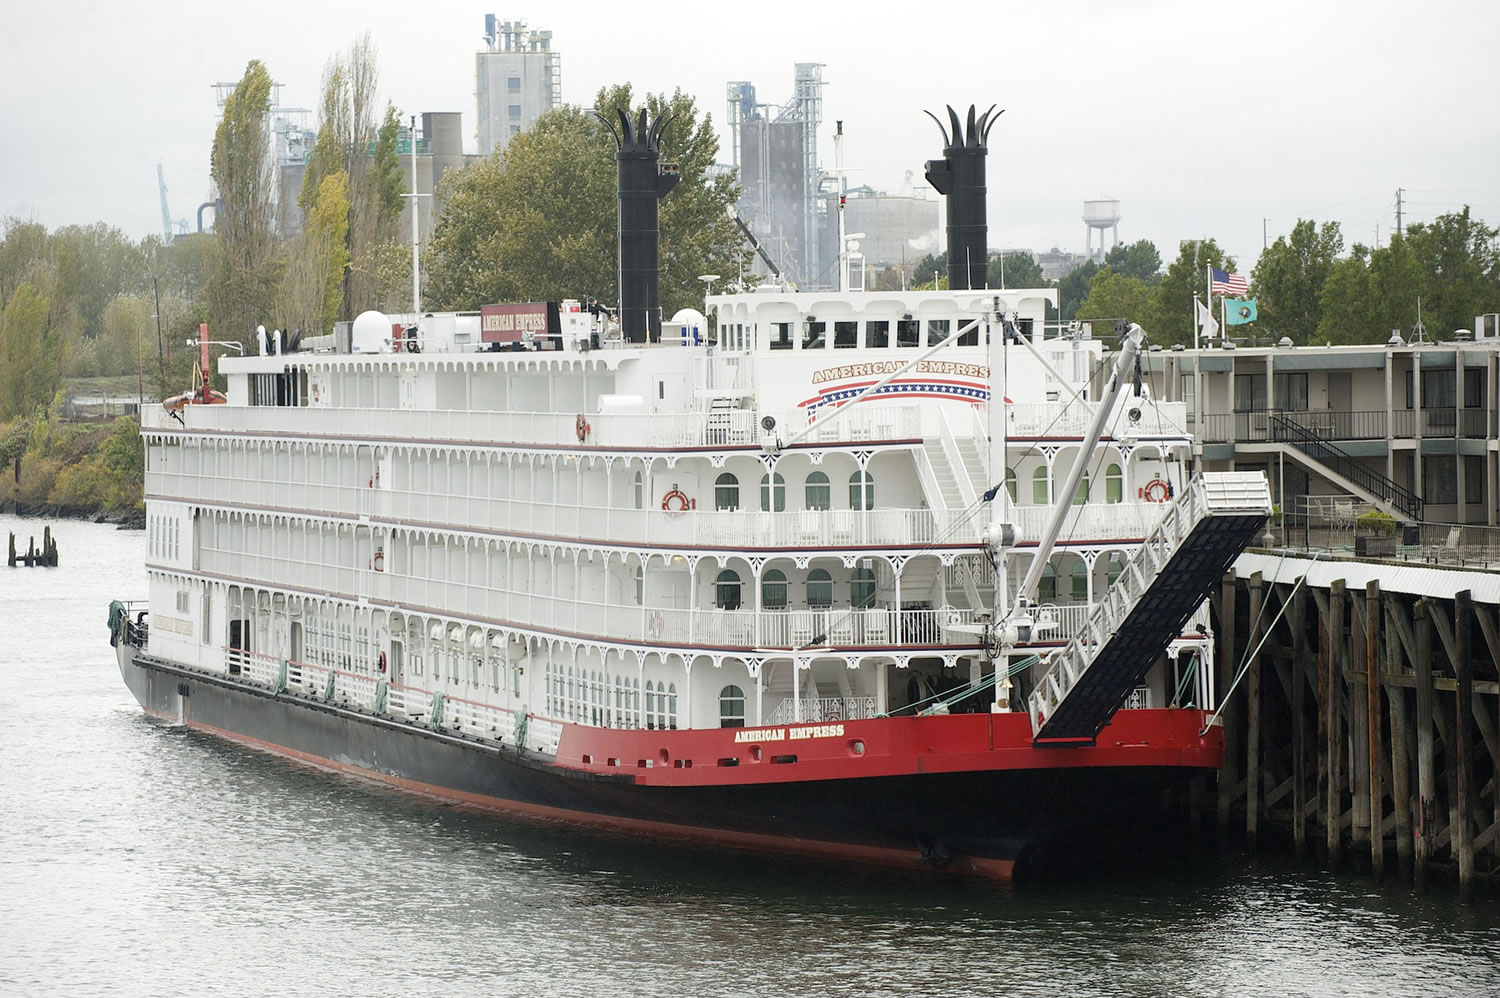 American Empress, which calls Vancouver its home port, proved popular in its first year of taking passengers on weeklong Columbia River tours from Astoria, Ore., to Clarkston.